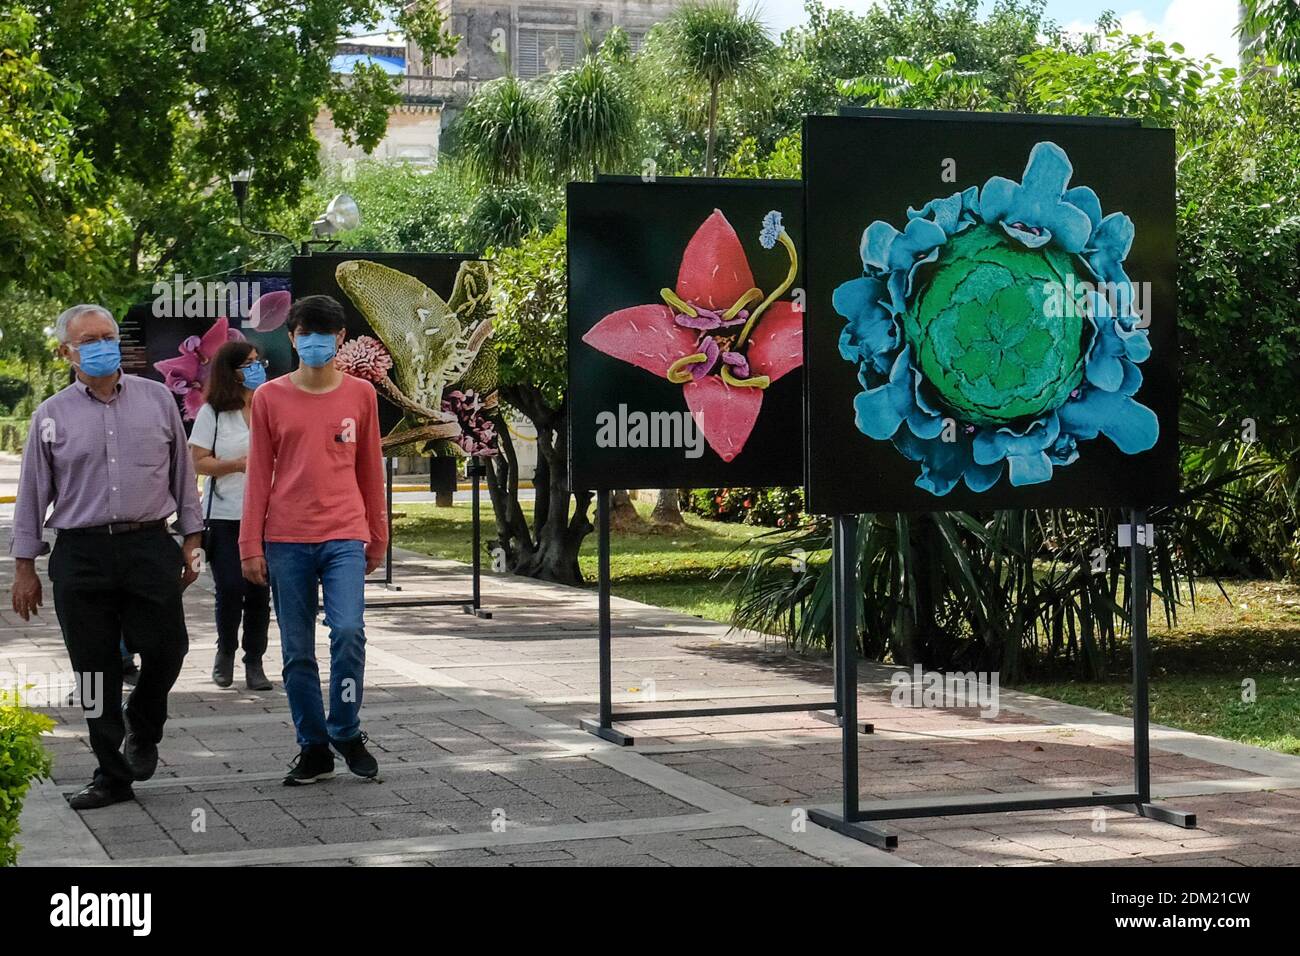 People looking at an exterior exhibit installed on Paseo Montejo, Merida Mexico during the Covid-19 Pandemic Stock Photo